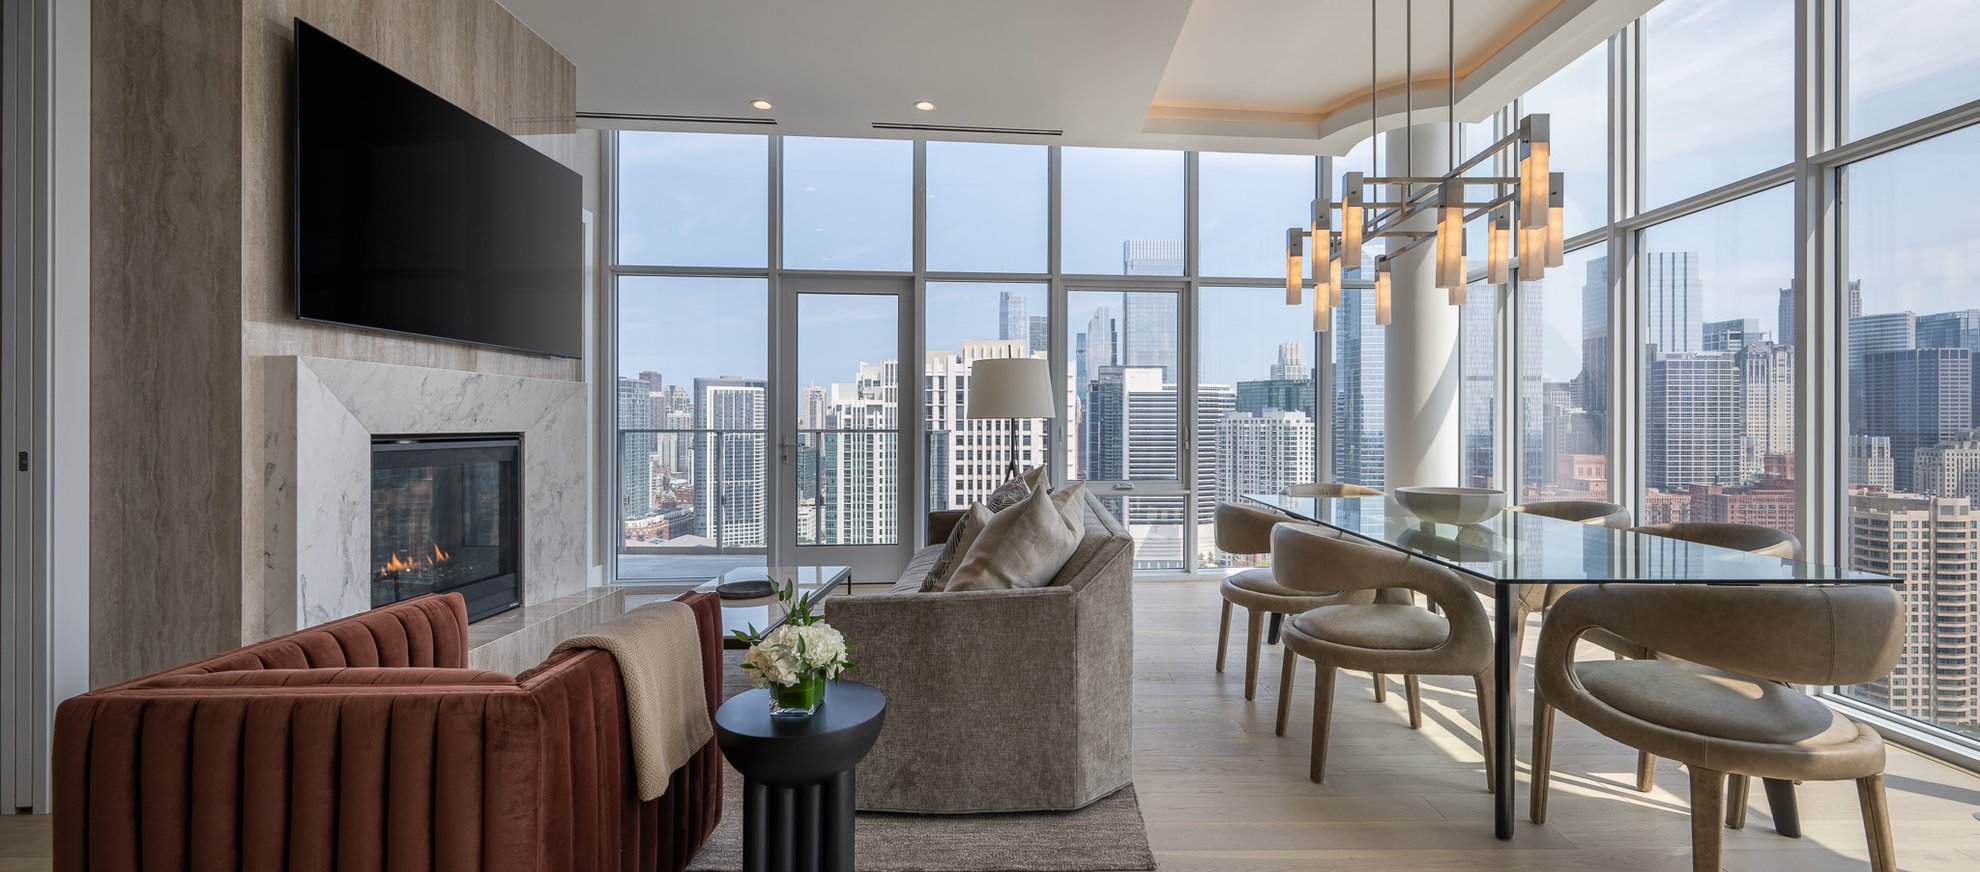 living area with modern furniture and beautiful view of chicago skyline at the penthouse level chicago fulton market